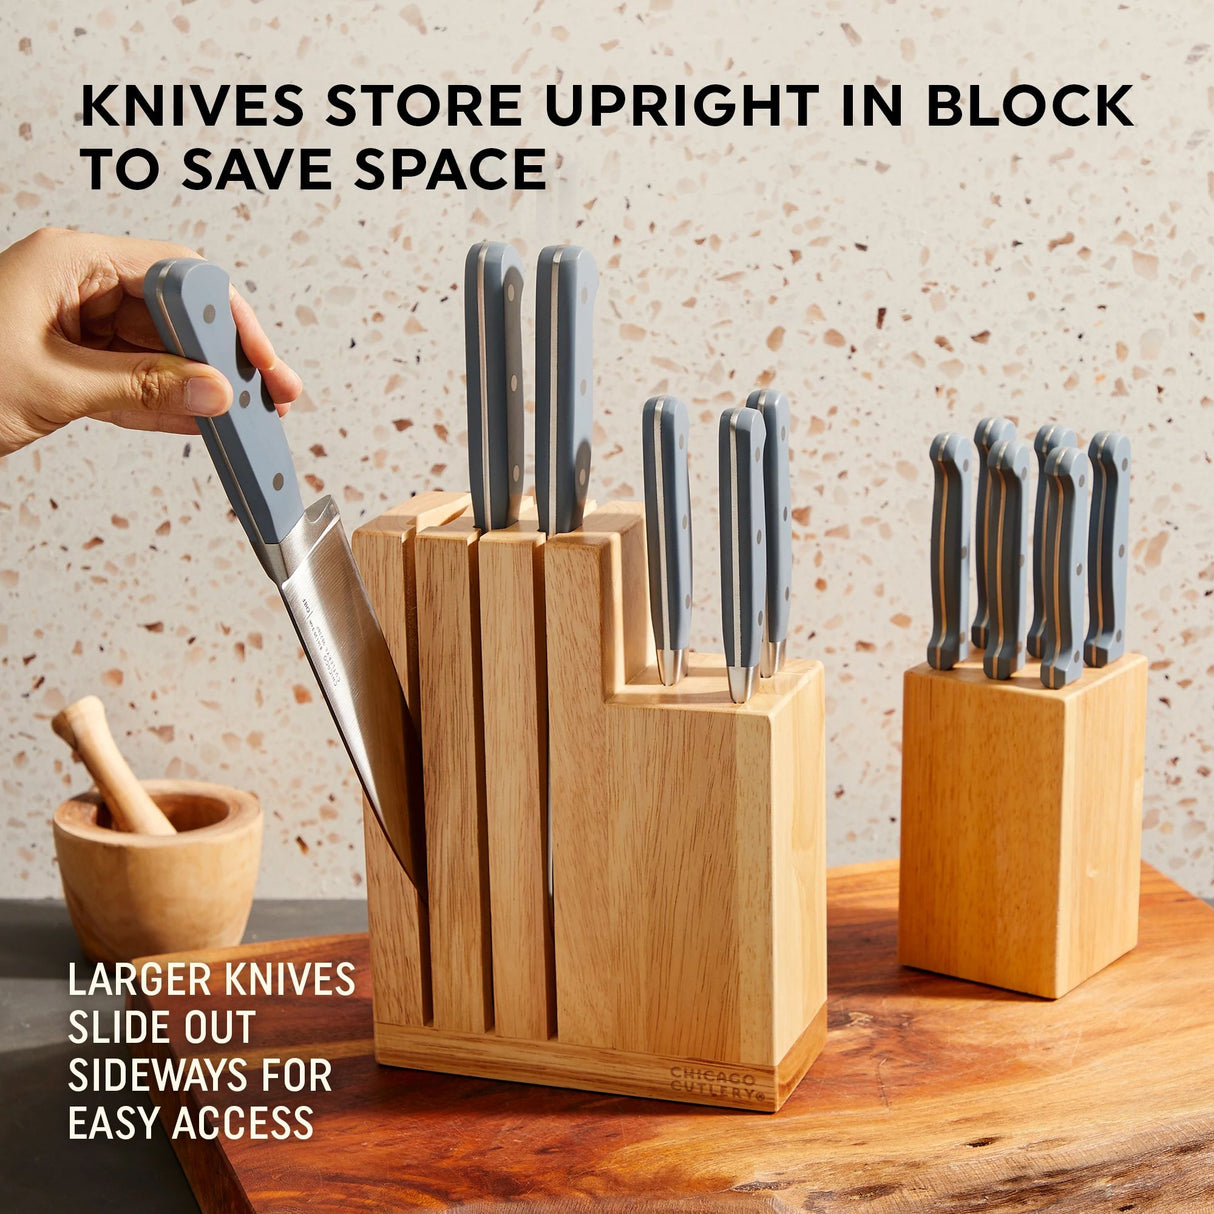  Halsted 14-piece Modular Block Set on counter with text knives storage upright in block to save space